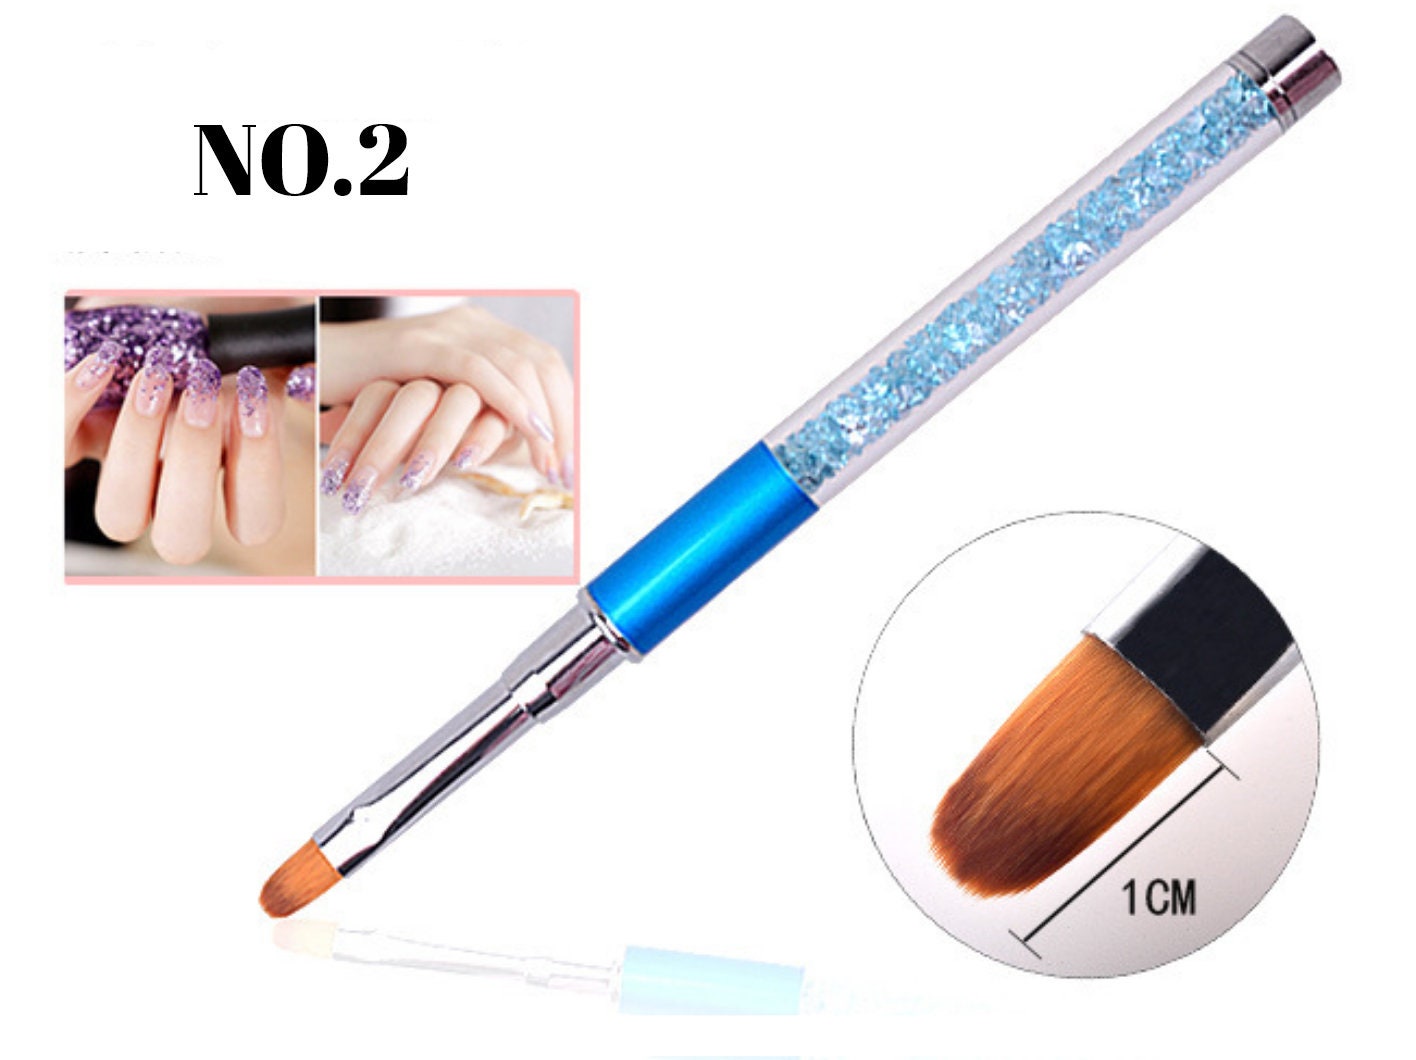 3. 10 Must-Have Nail Art Brushes for Beginners - wide 4